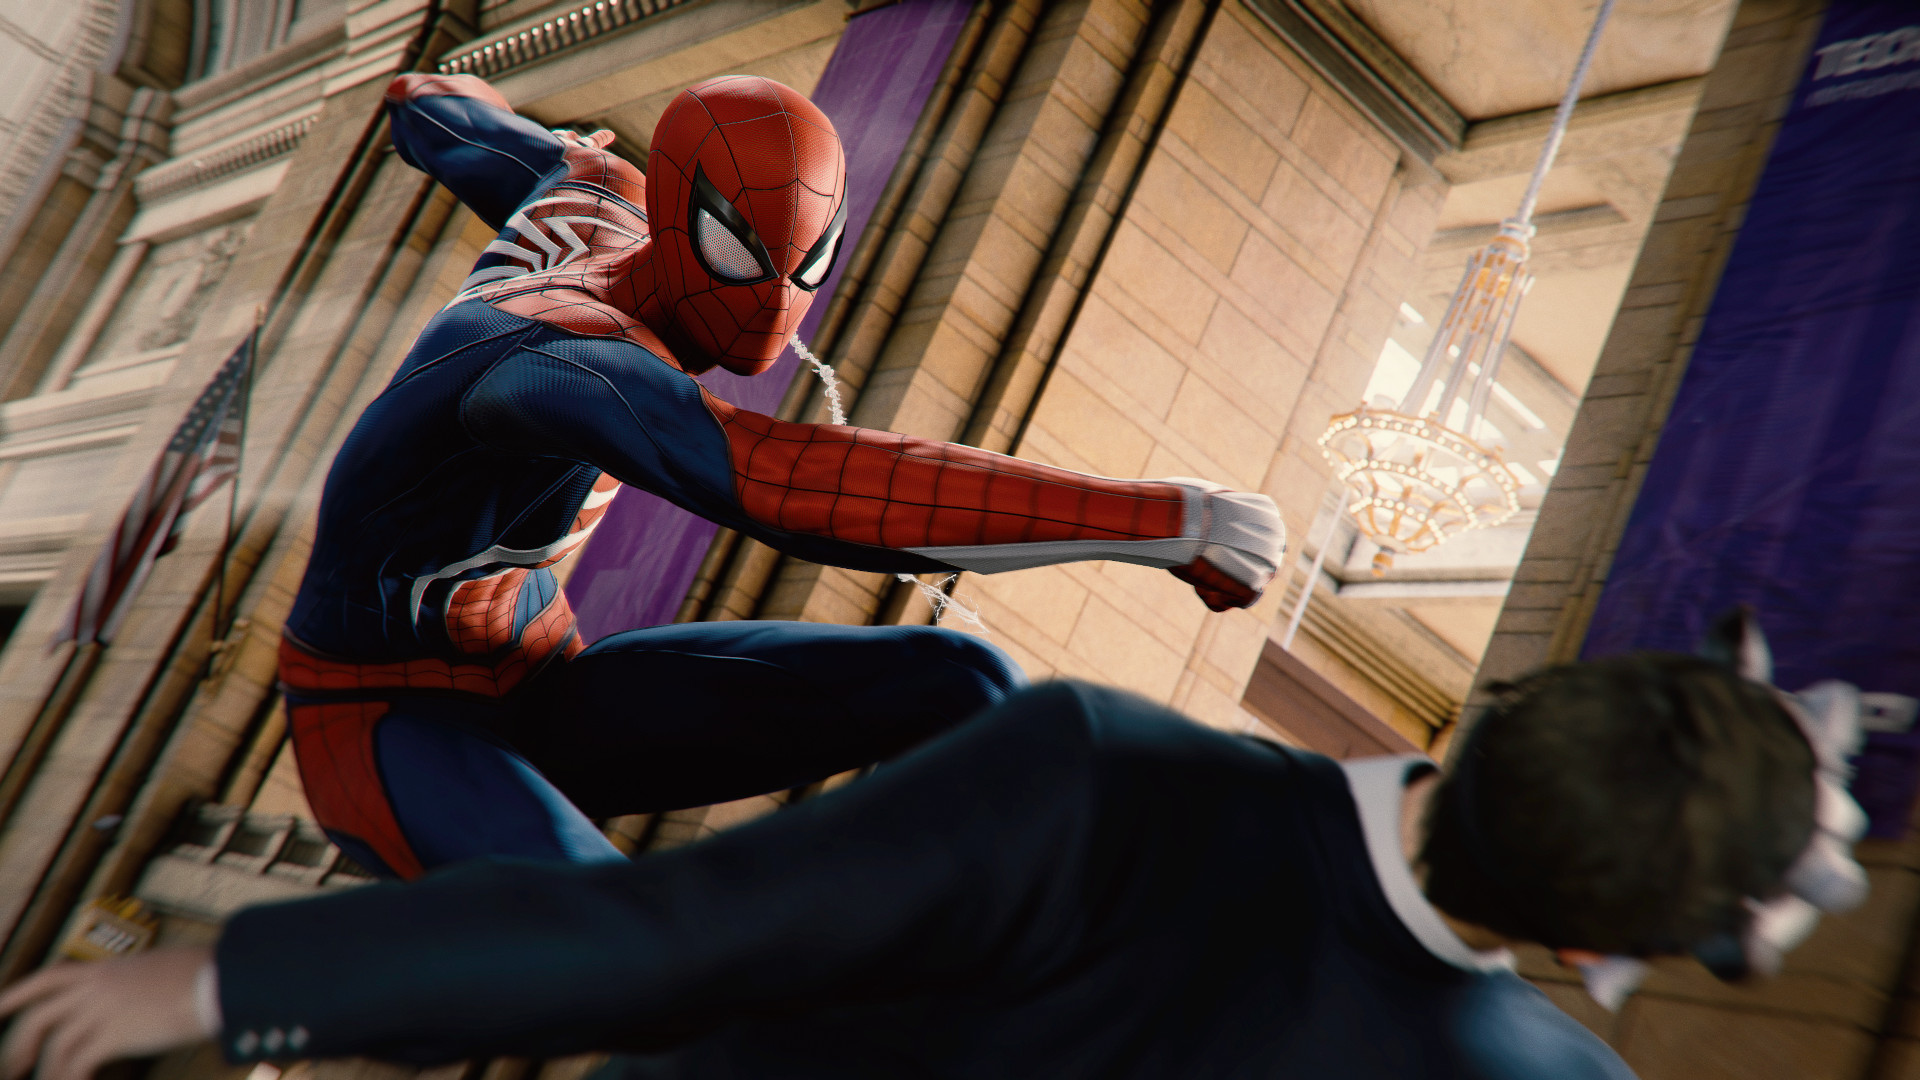 Marvel's Spider-Man Remastered PC review: A goon receives a punch from the web slinger himself